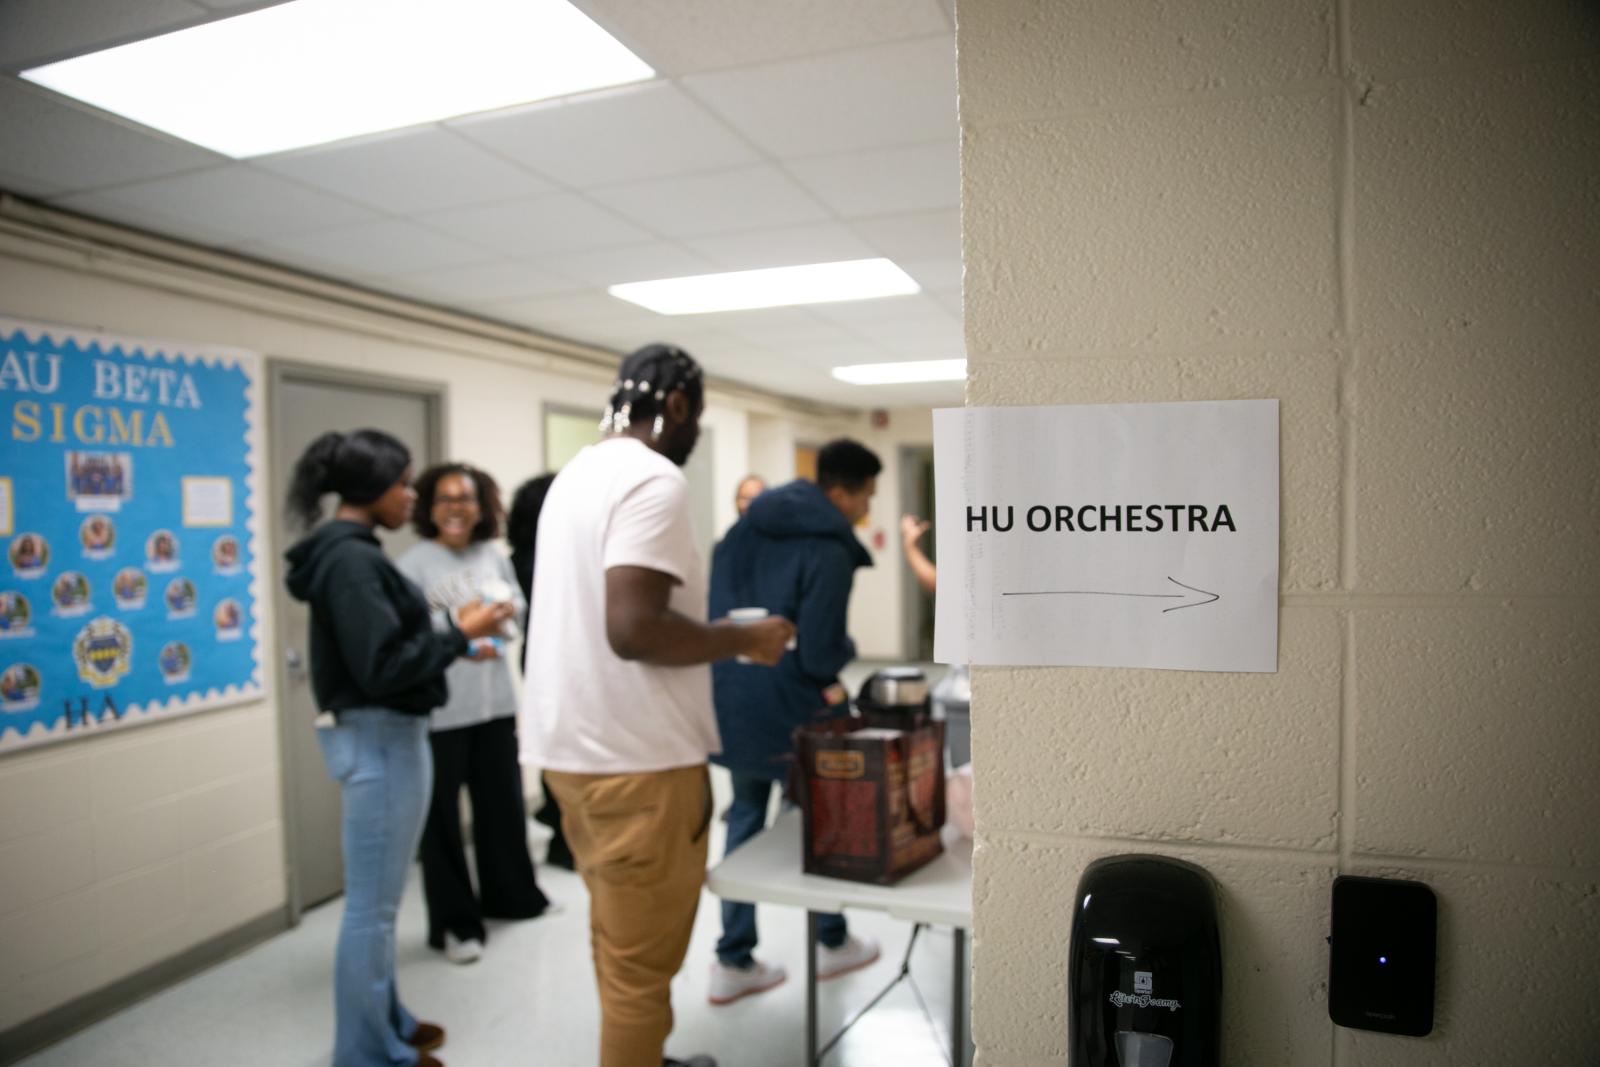 Gathered in the hallway outside of the practice room, HU Orchestra musicians enjoy refreshments during their brief break.